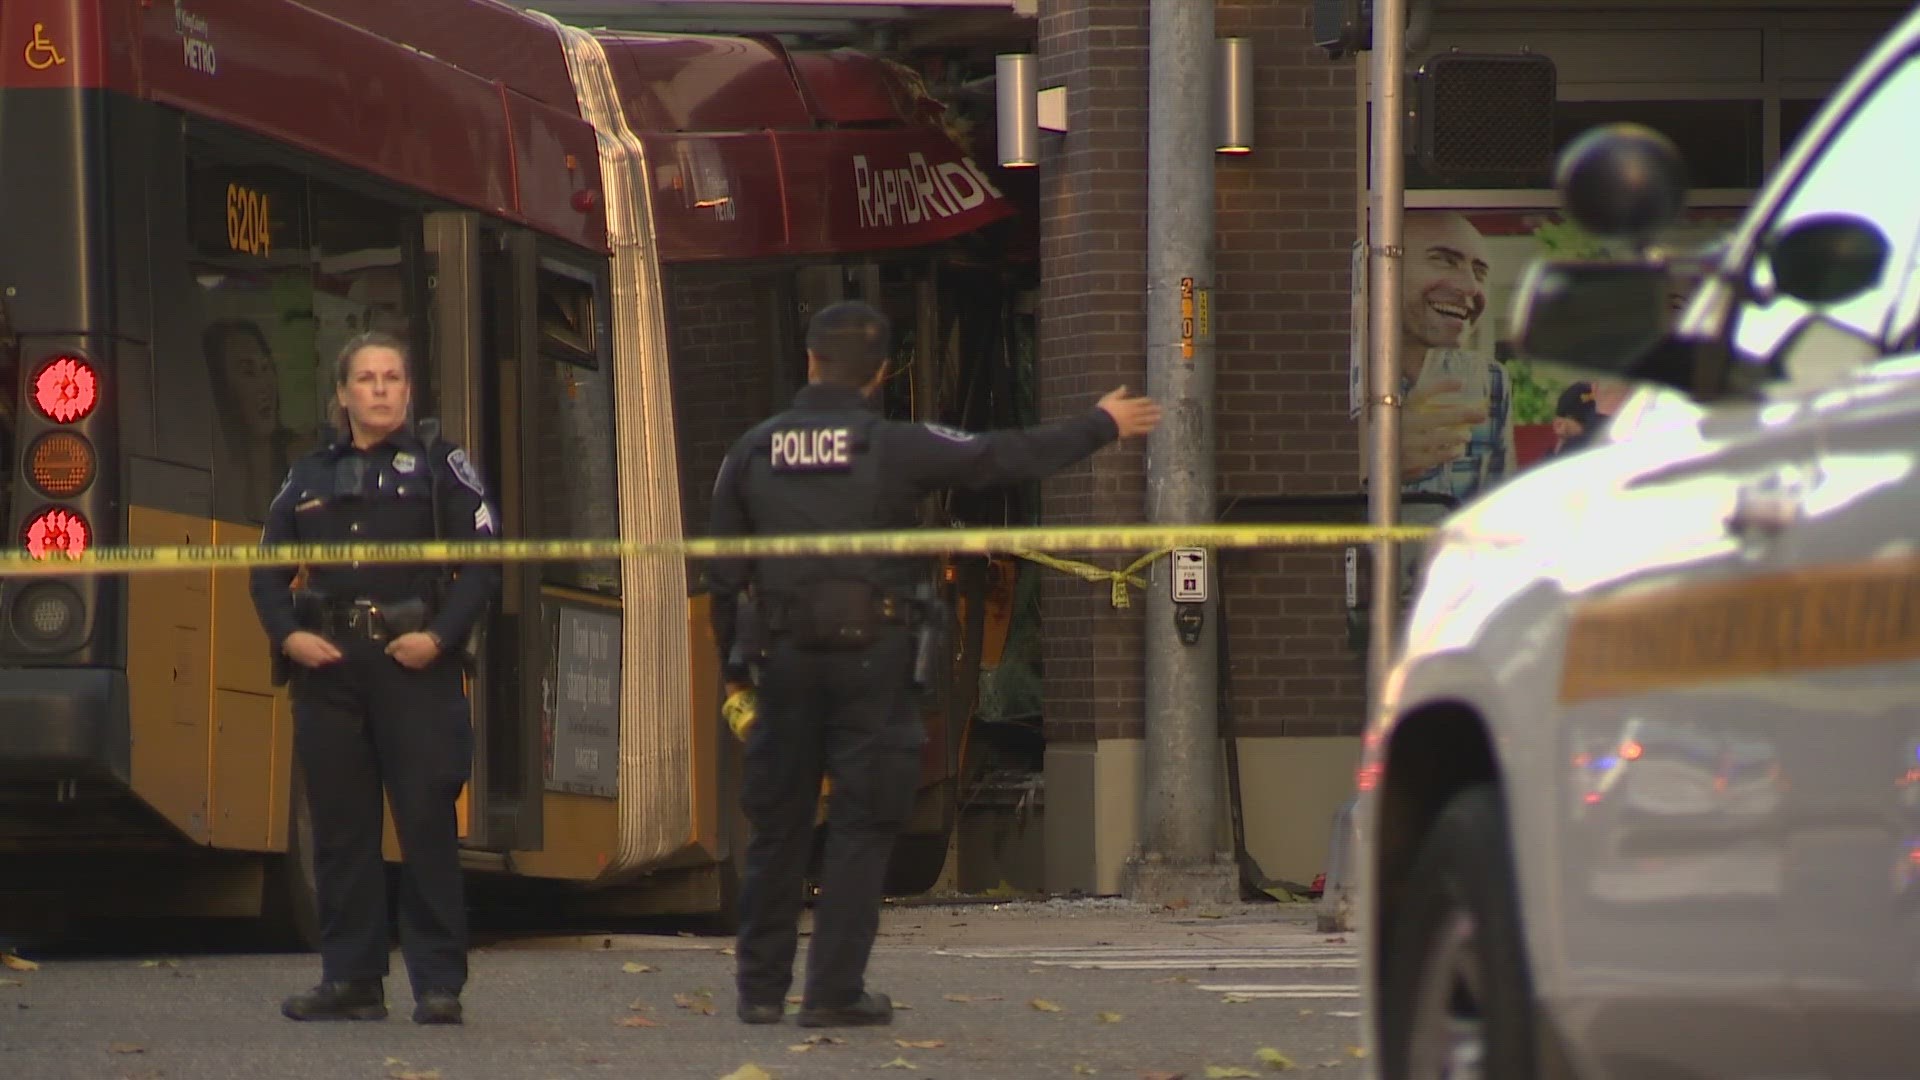 A vehicle collided with a bus, which then crashed into a building near 5th Avenue and Battery Street on Saturday afternoon, Seattle Fire says